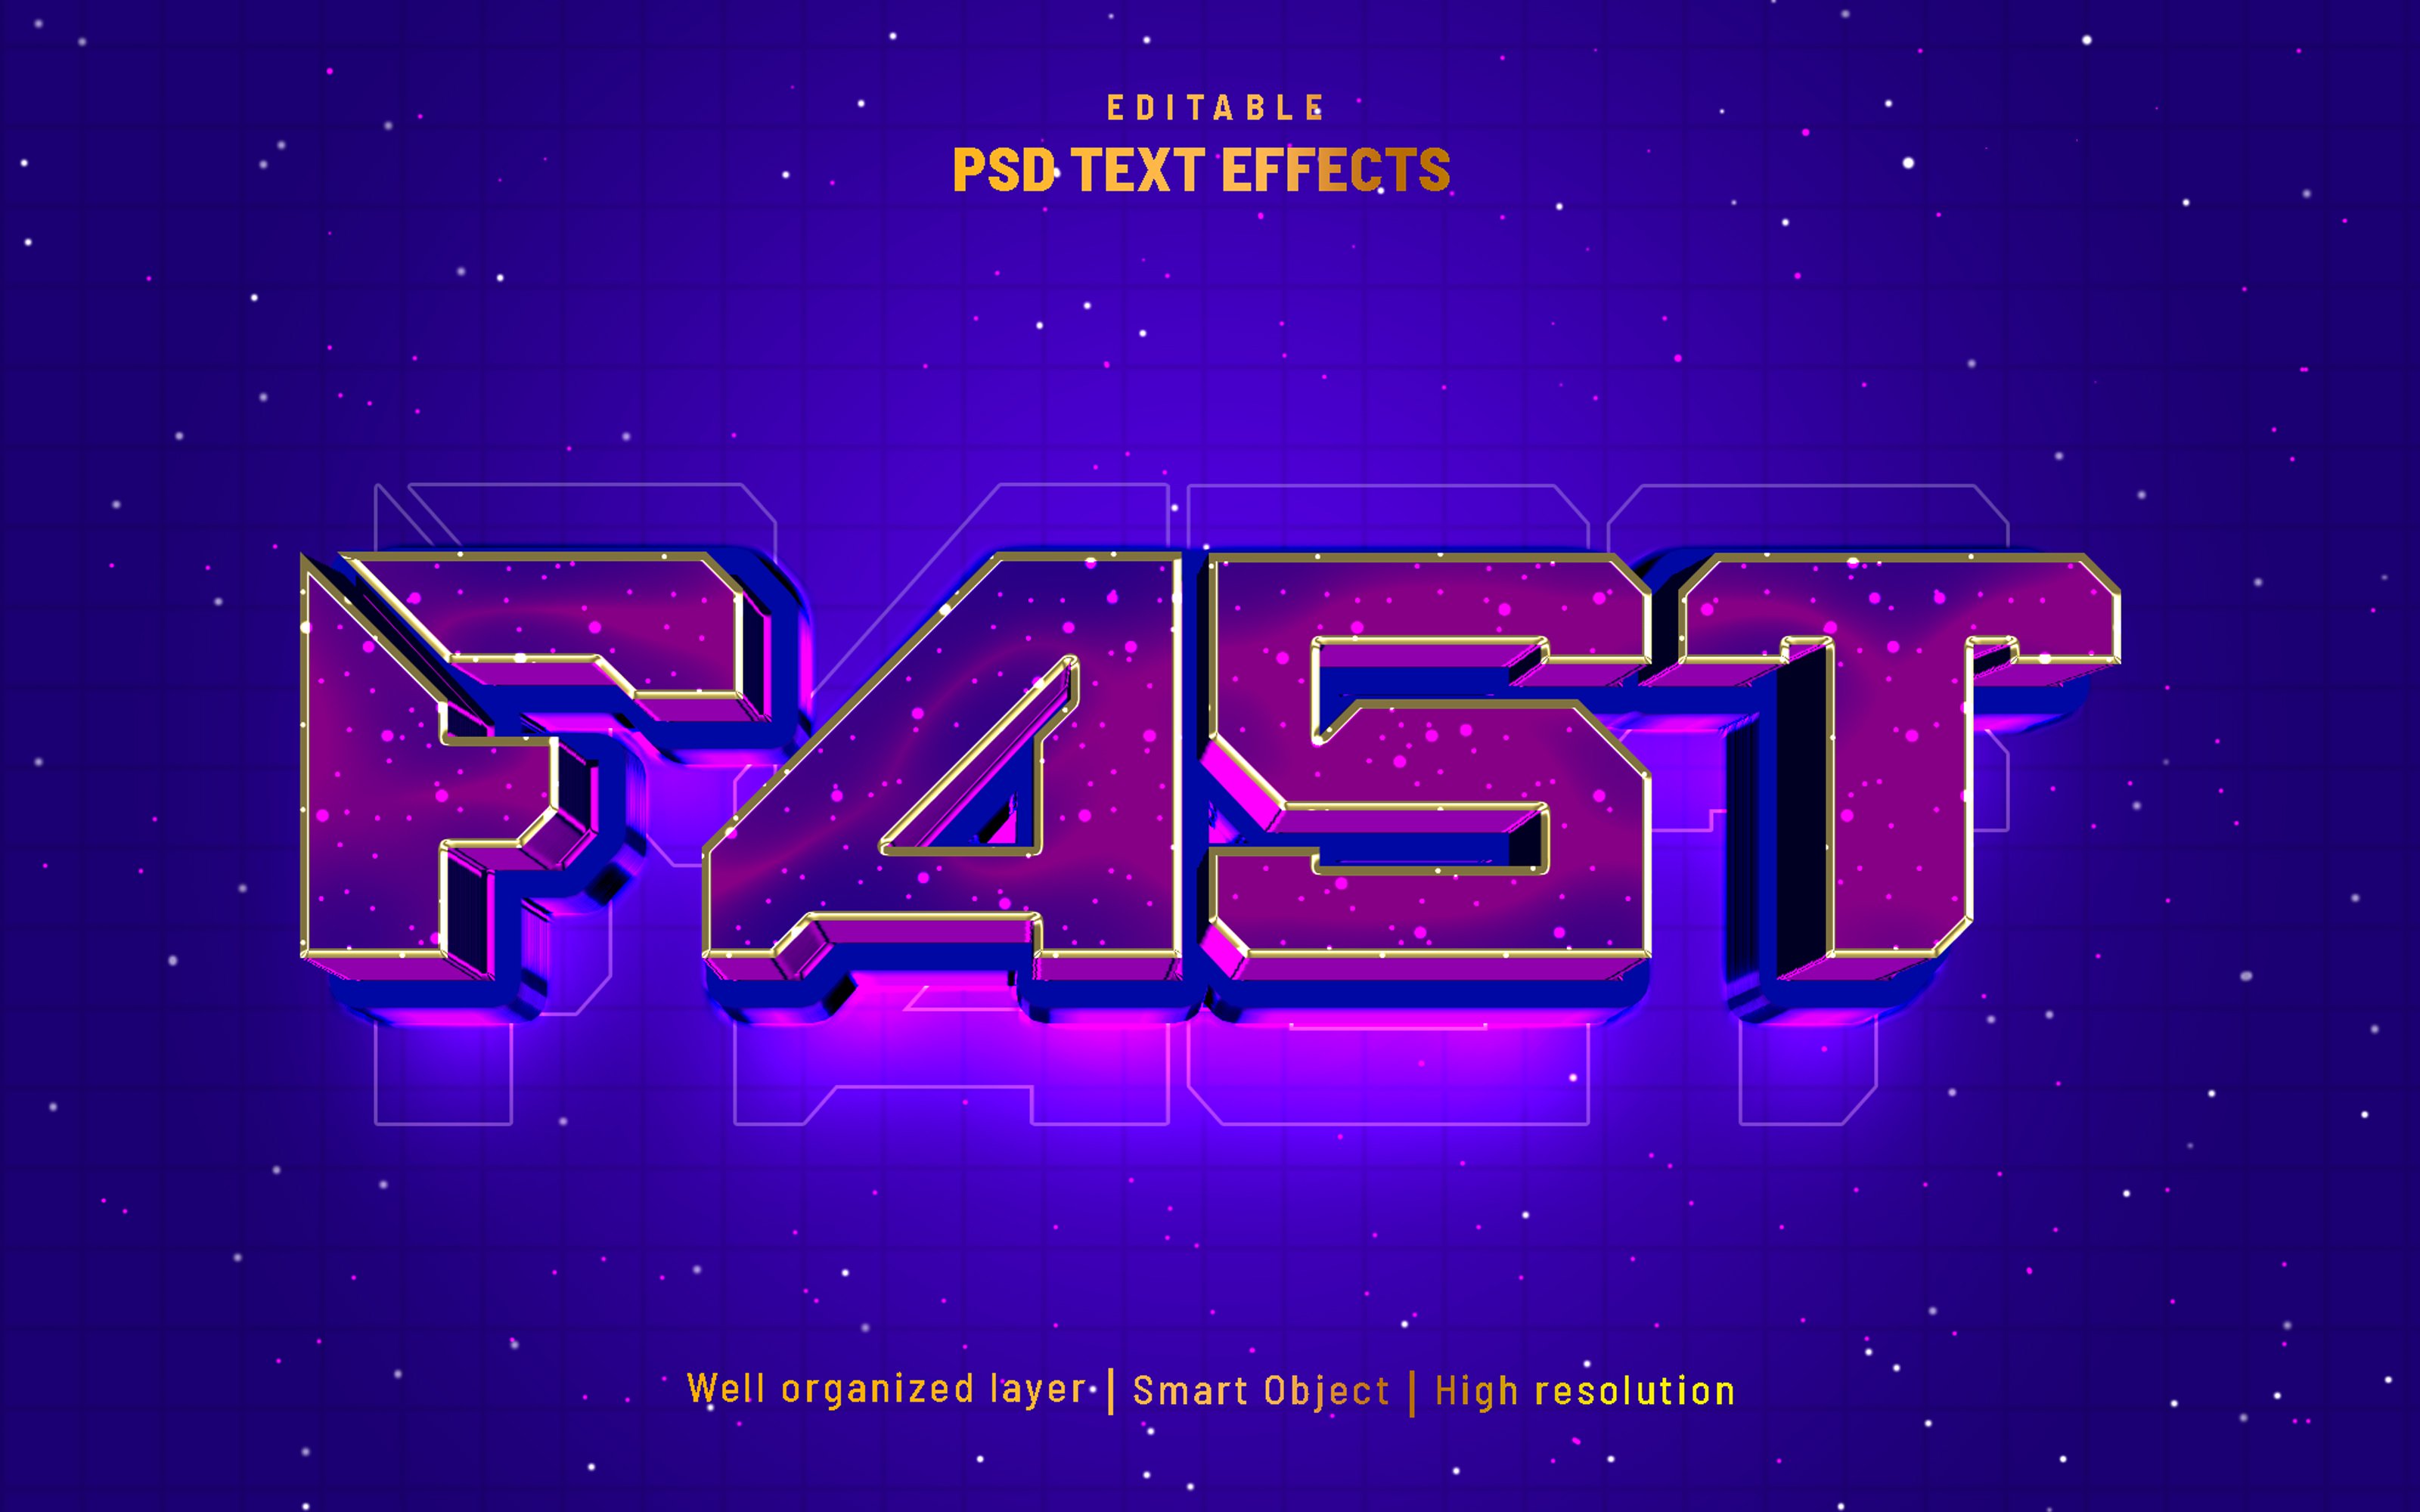 Fast 3D editable text effect PSDcover image.